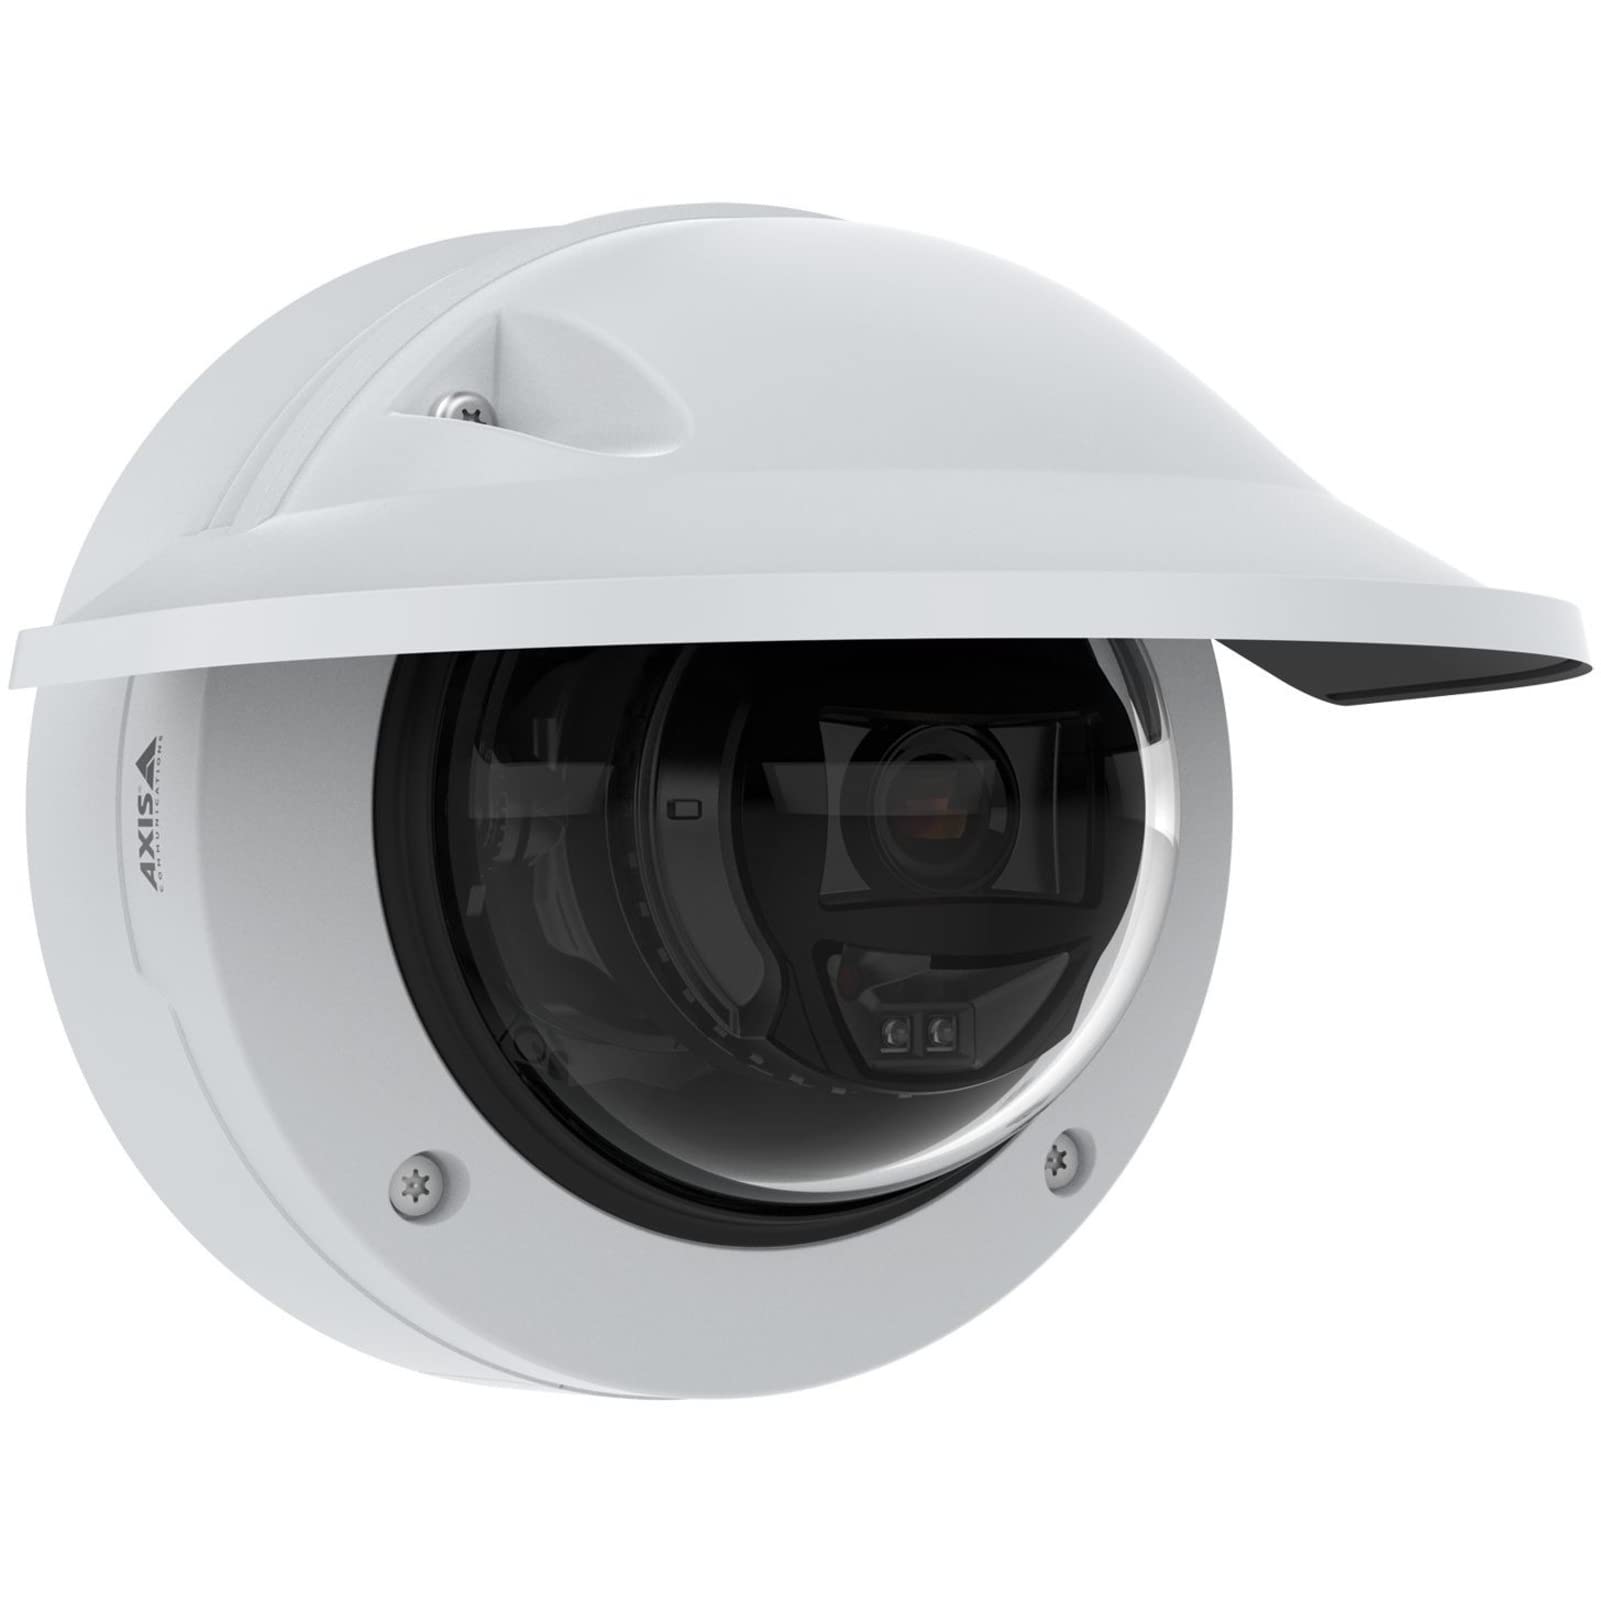 AXIS outdoor P3265-LVE P32 Network Camera, White, 1080p